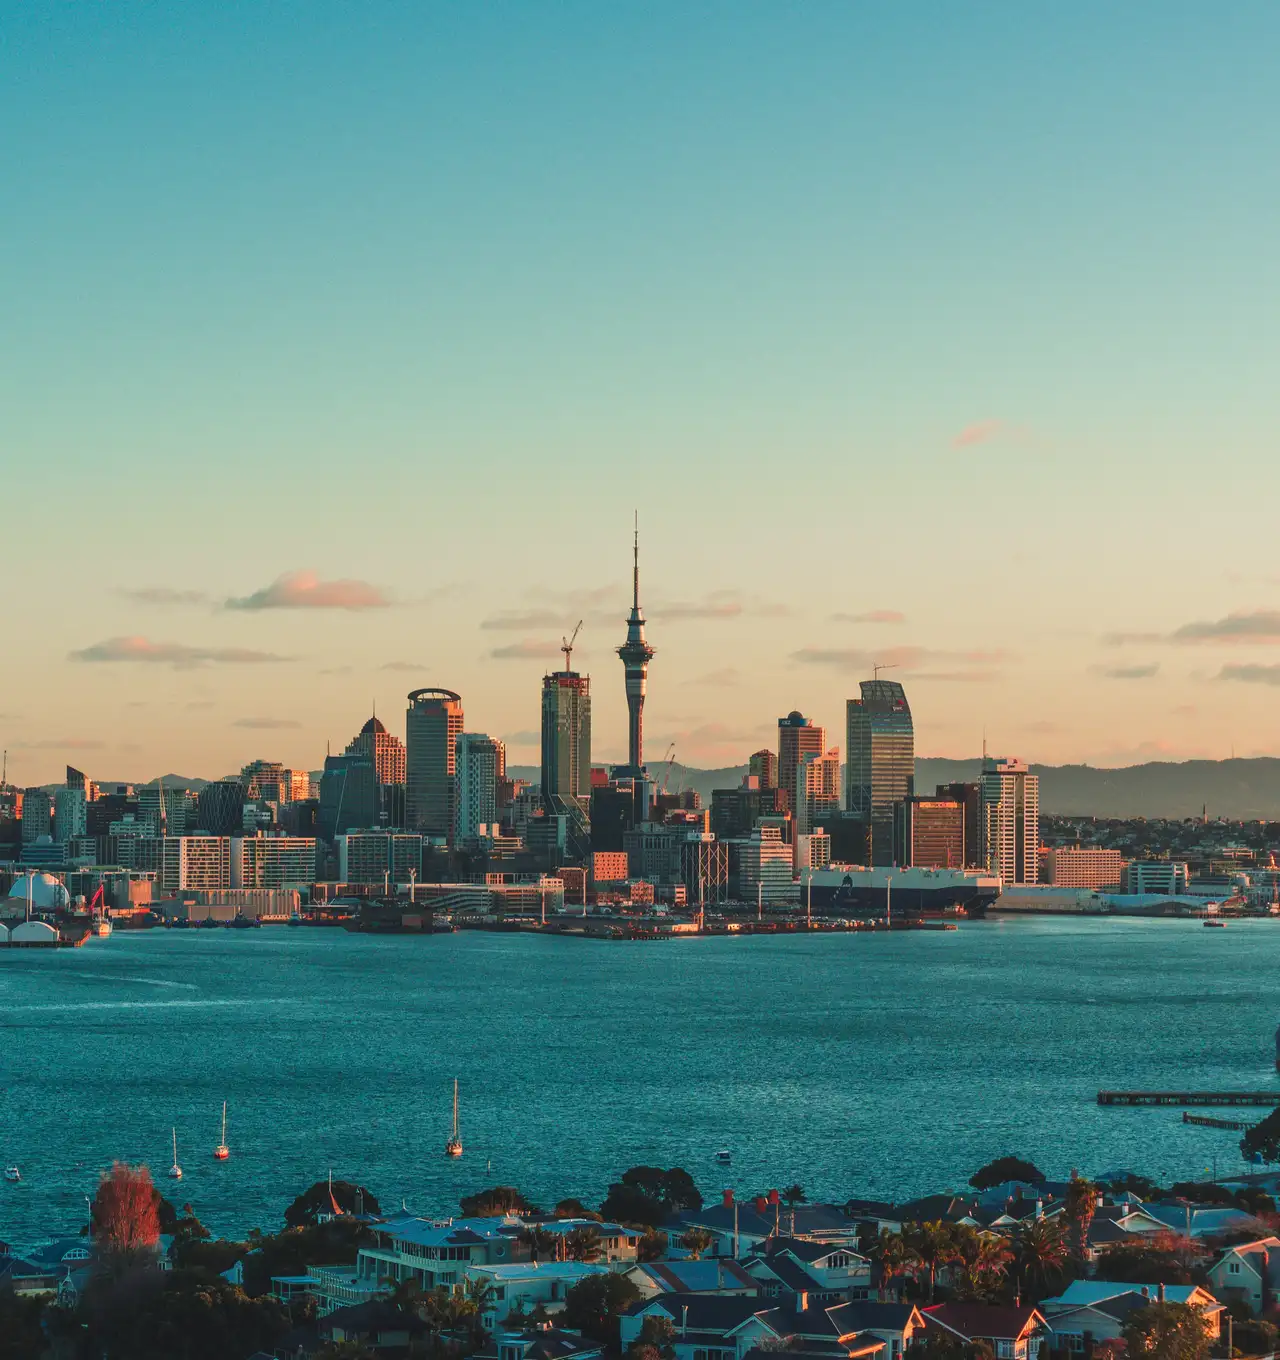 Looking out over Auckland from Devonport